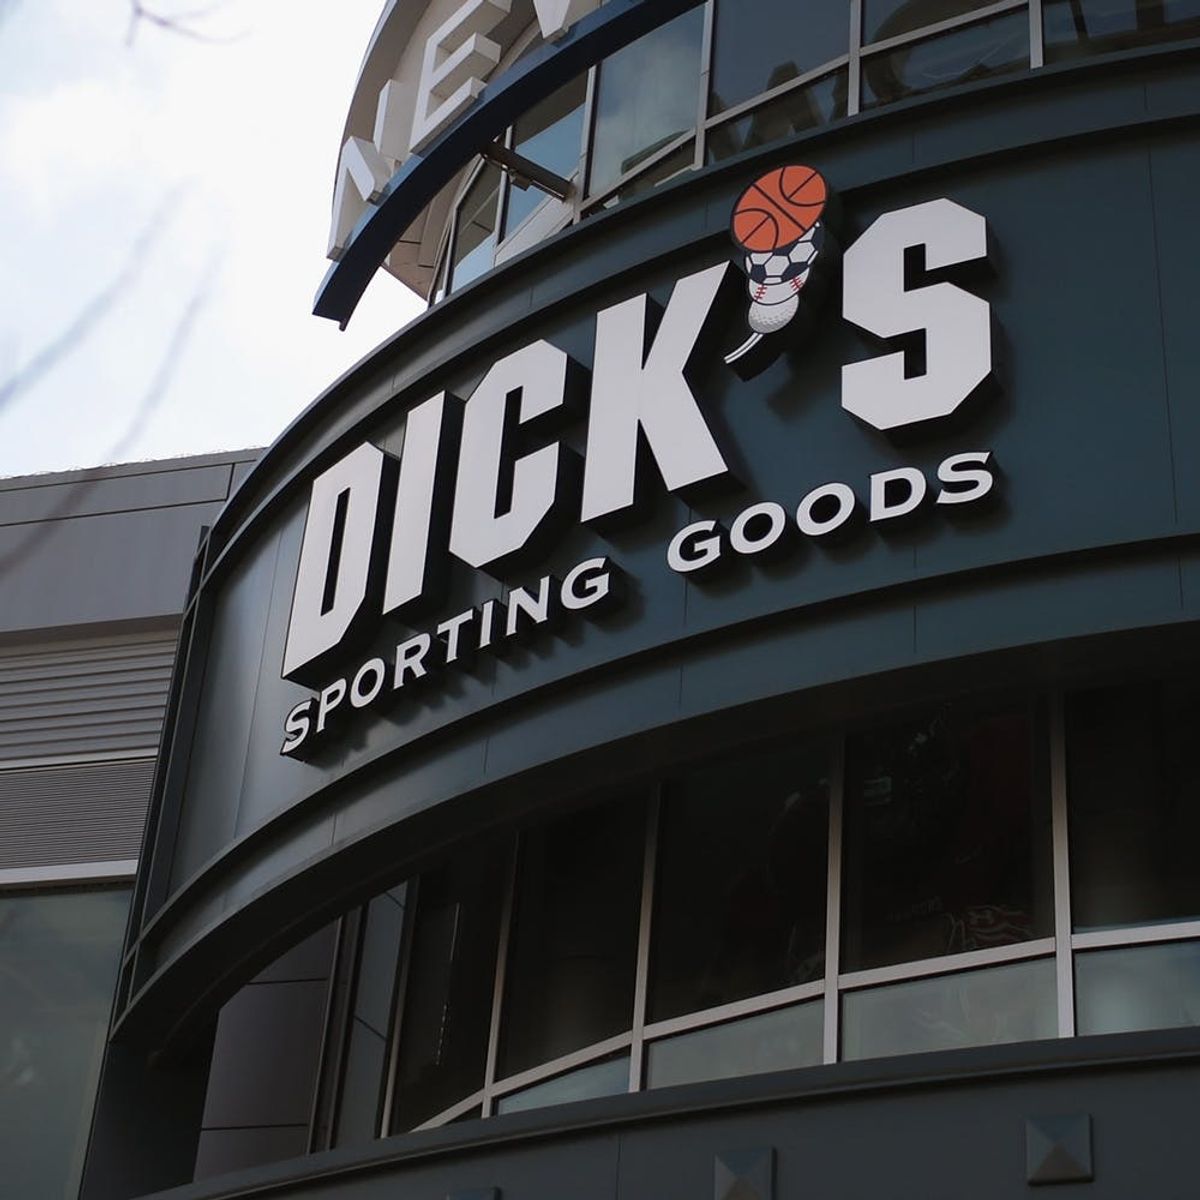 Dick’s Sporting Goods Just Took a Strong Stance Against Gun Violence